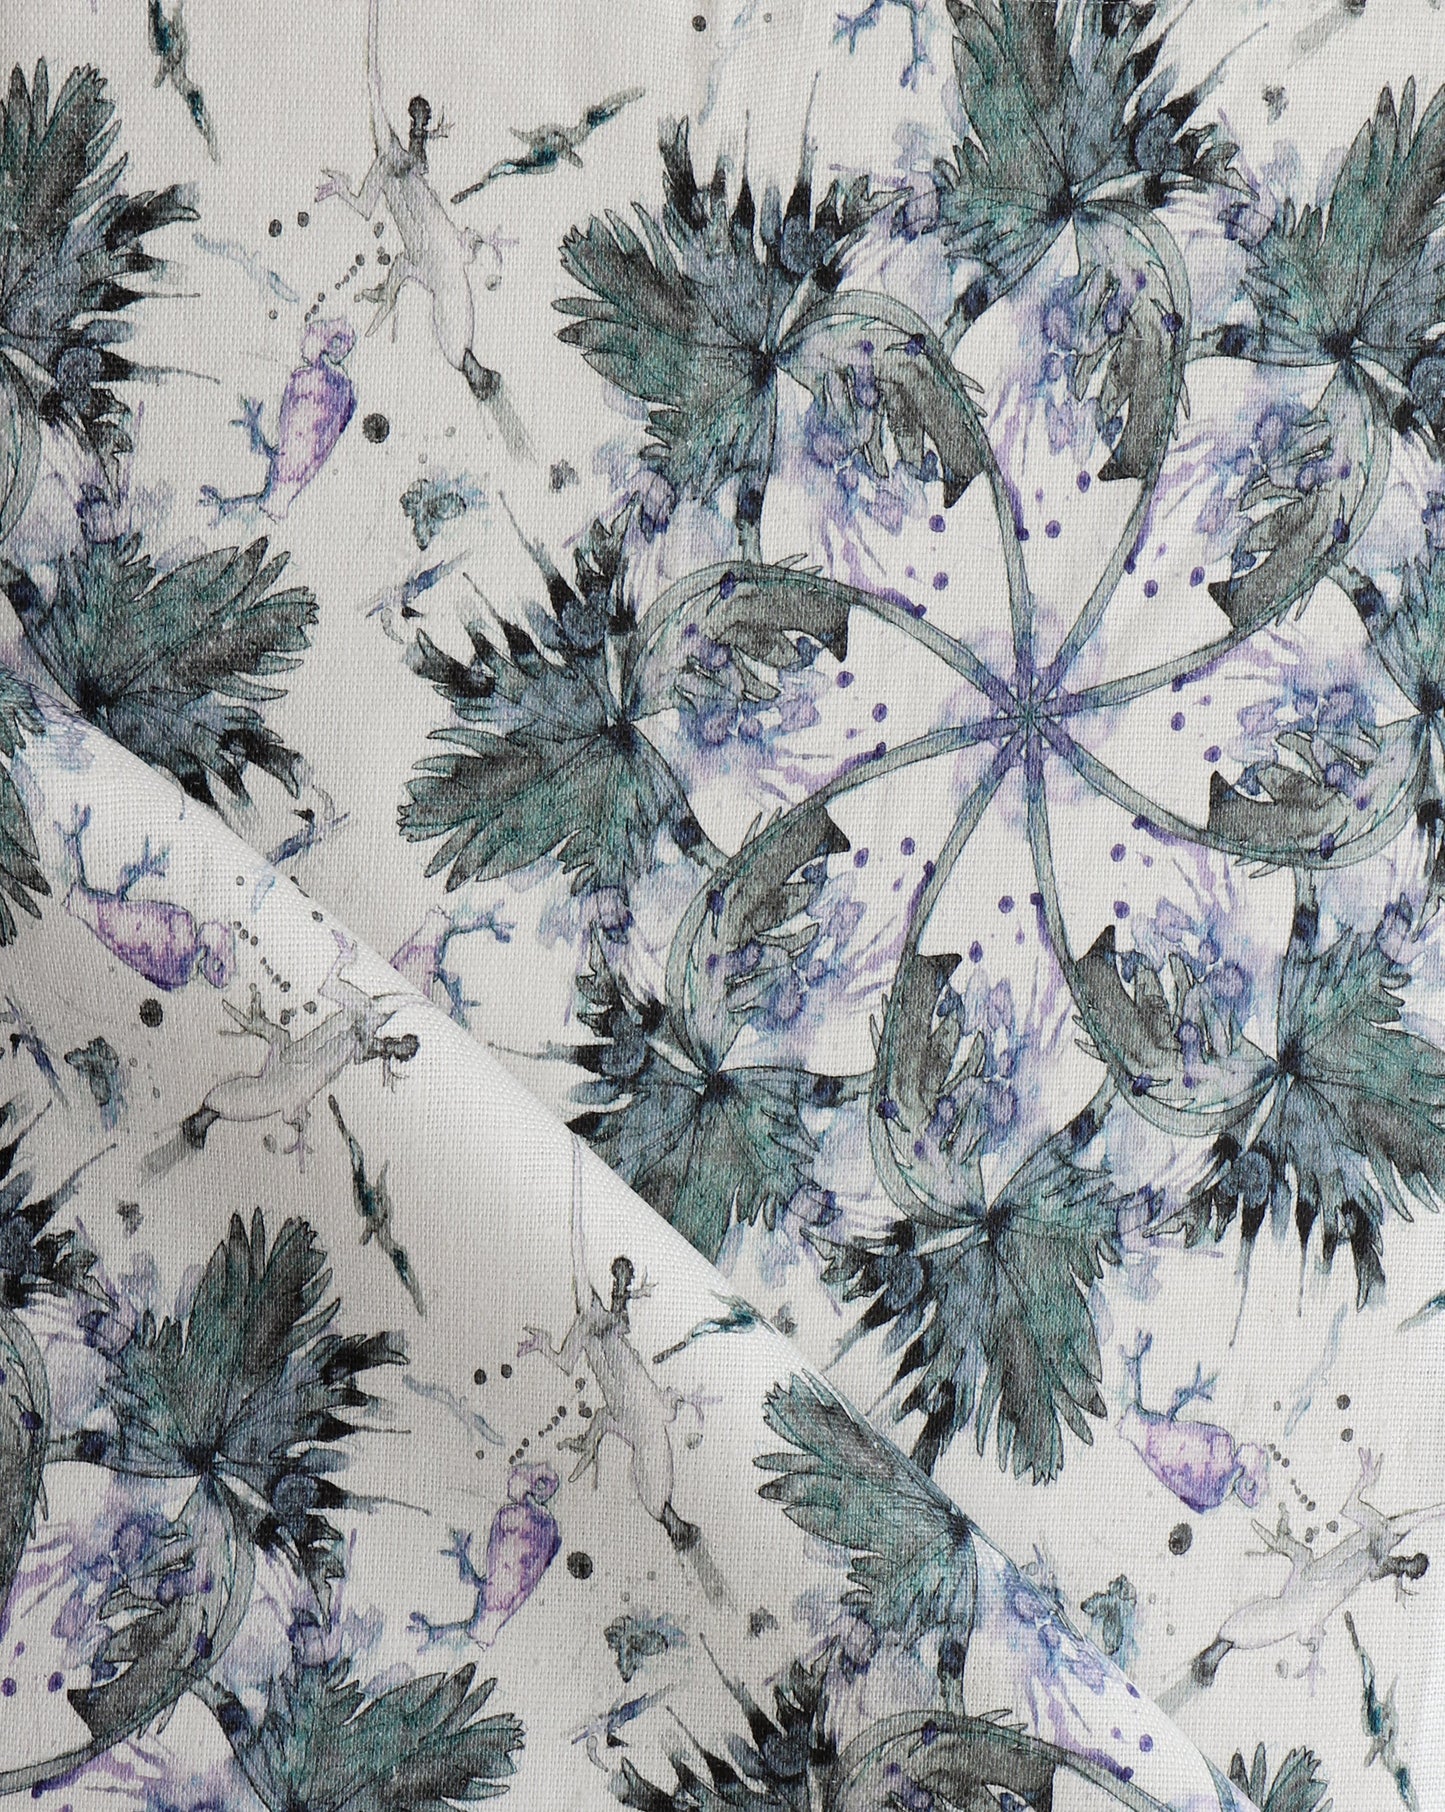 A Laurel Forest Fabric with a blue and purple tropical atmosphere